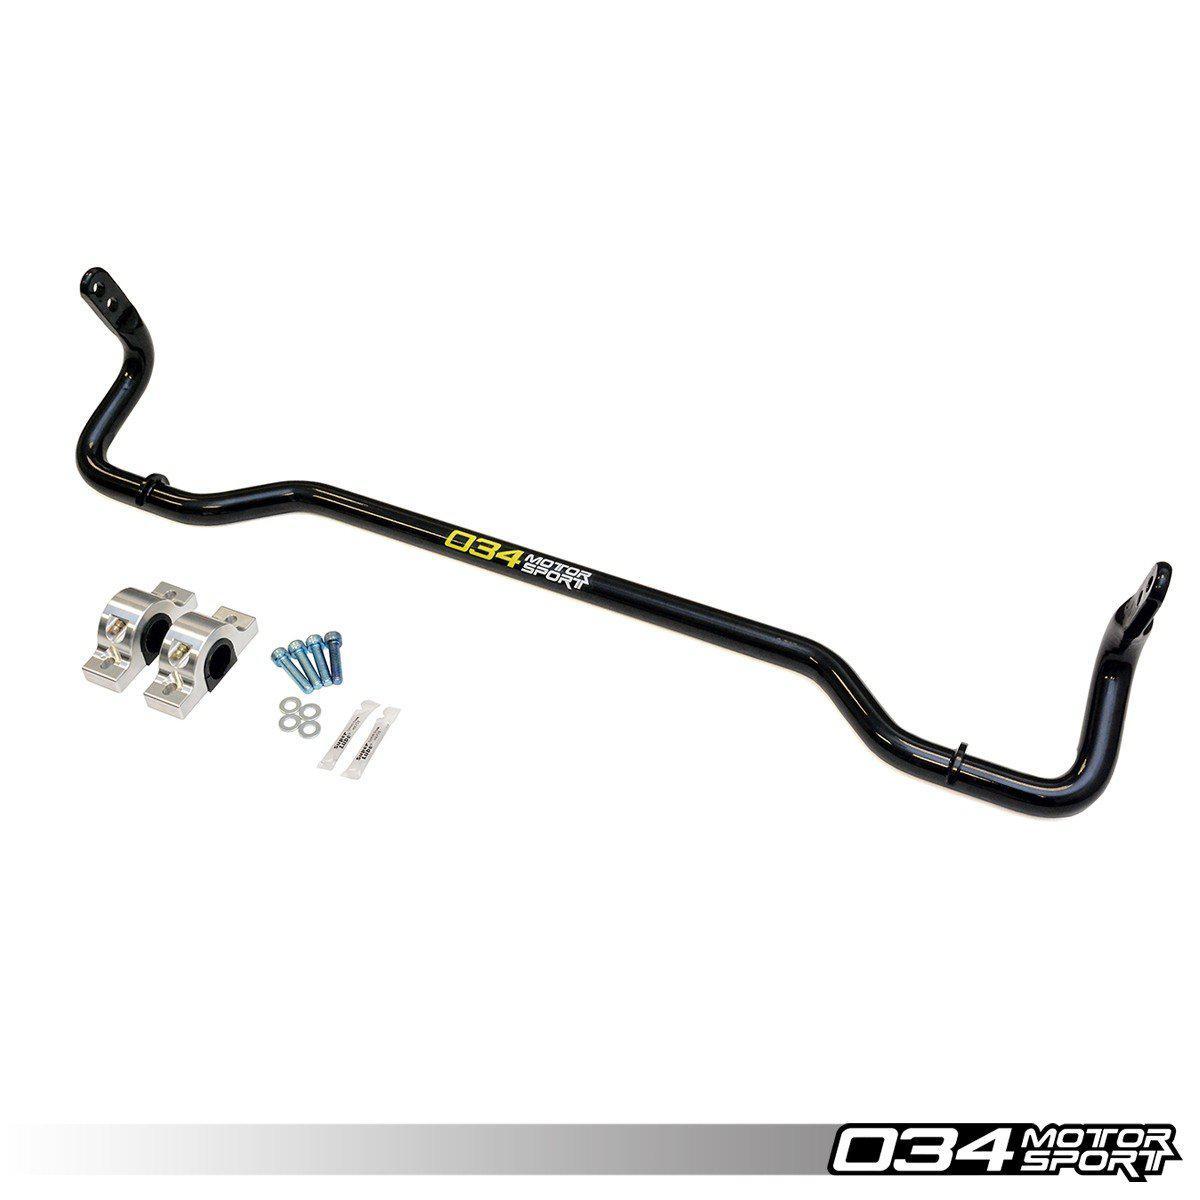 Adjustable MQB Solid Rear Sway Bar Upgrade, MKVII Volkswagen Golf/GTI, 8V Audi A3 FWD-A Little Tuning Co